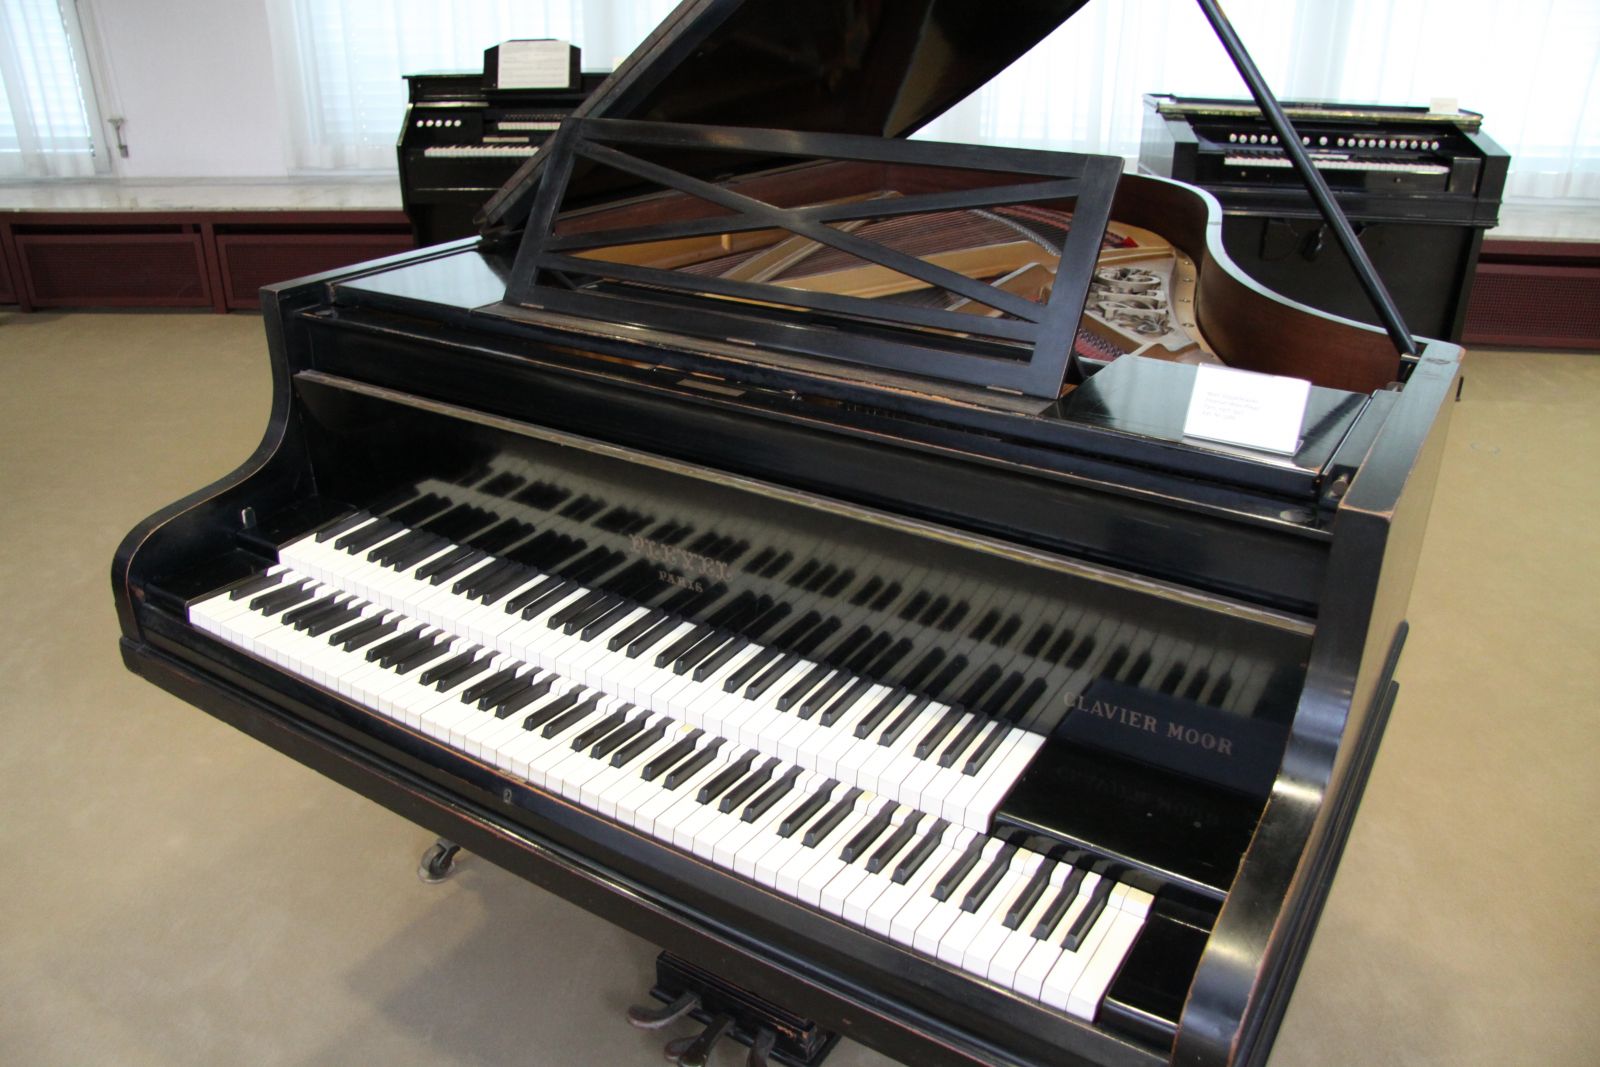 A grand piano with a double keyboard… what’s this about?